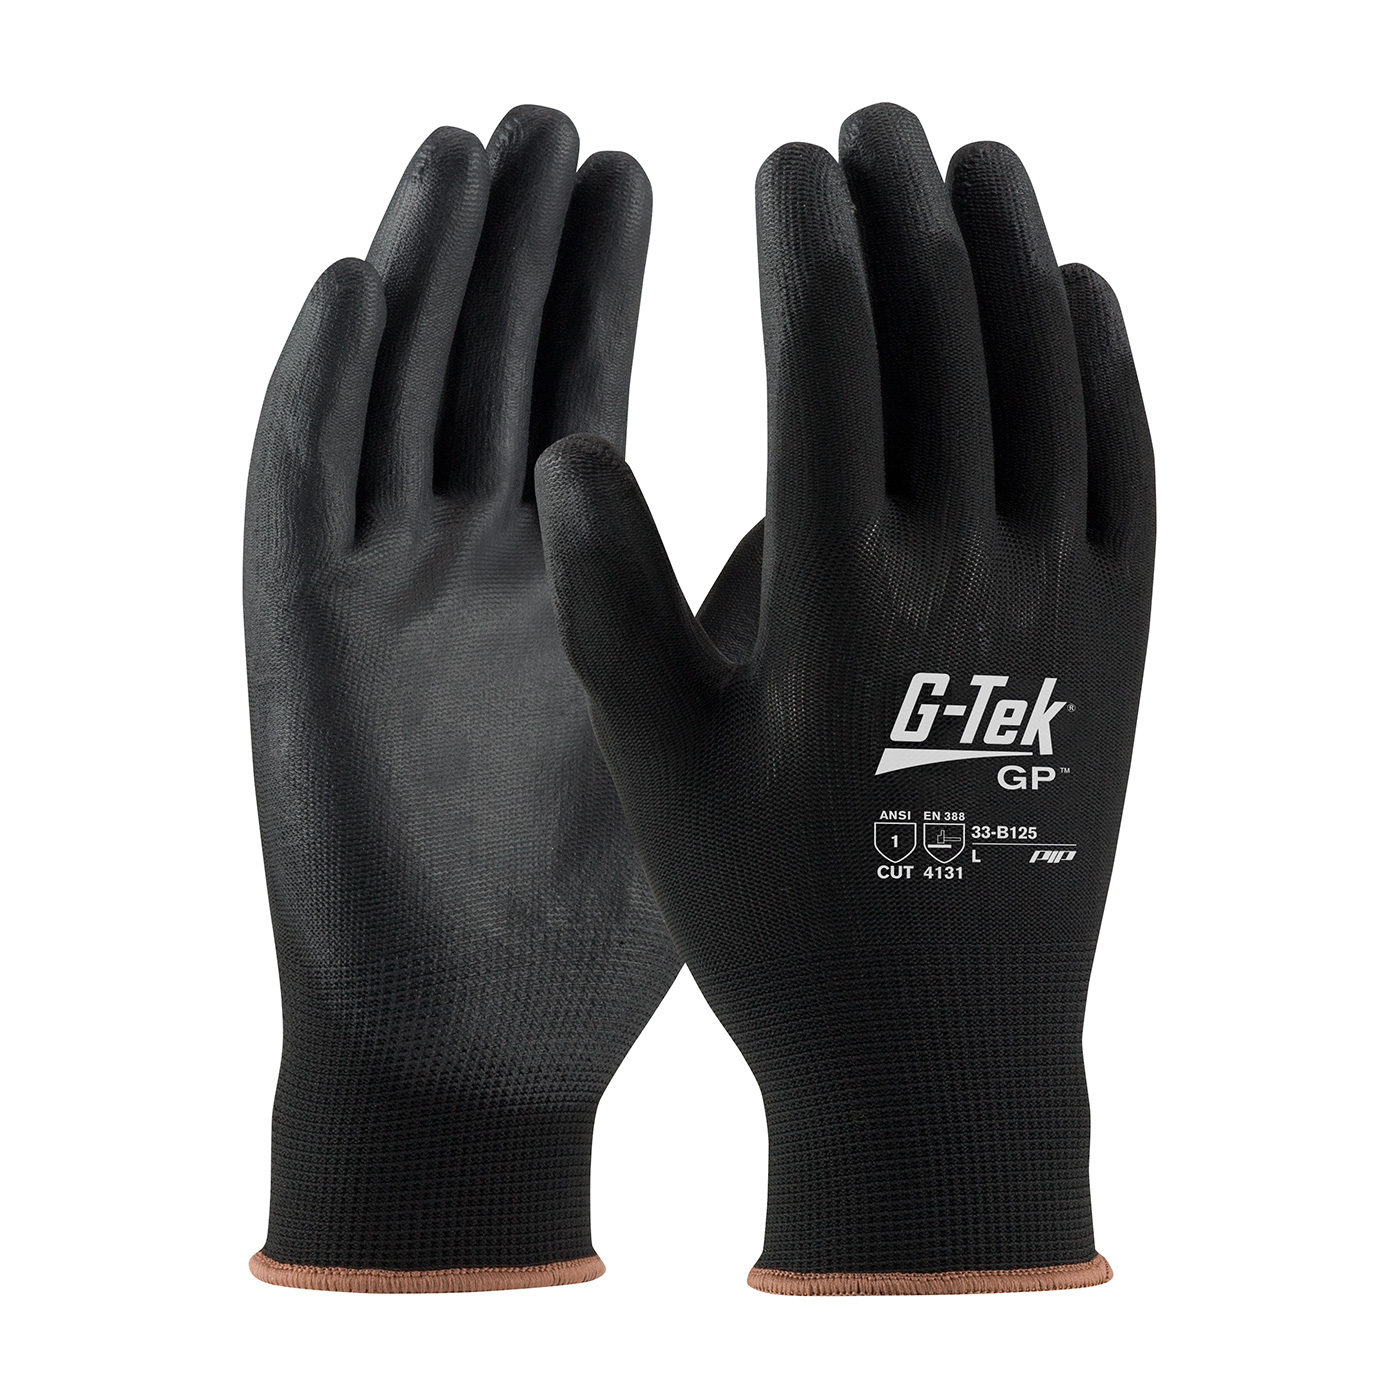 PIP 33-B125/L G-Tek GP Hi-Vis Seamless Knit Polyester Glove with Polyurethane Coated Smooth Grip on Palm & Fingers - Large PID-33 B125 L